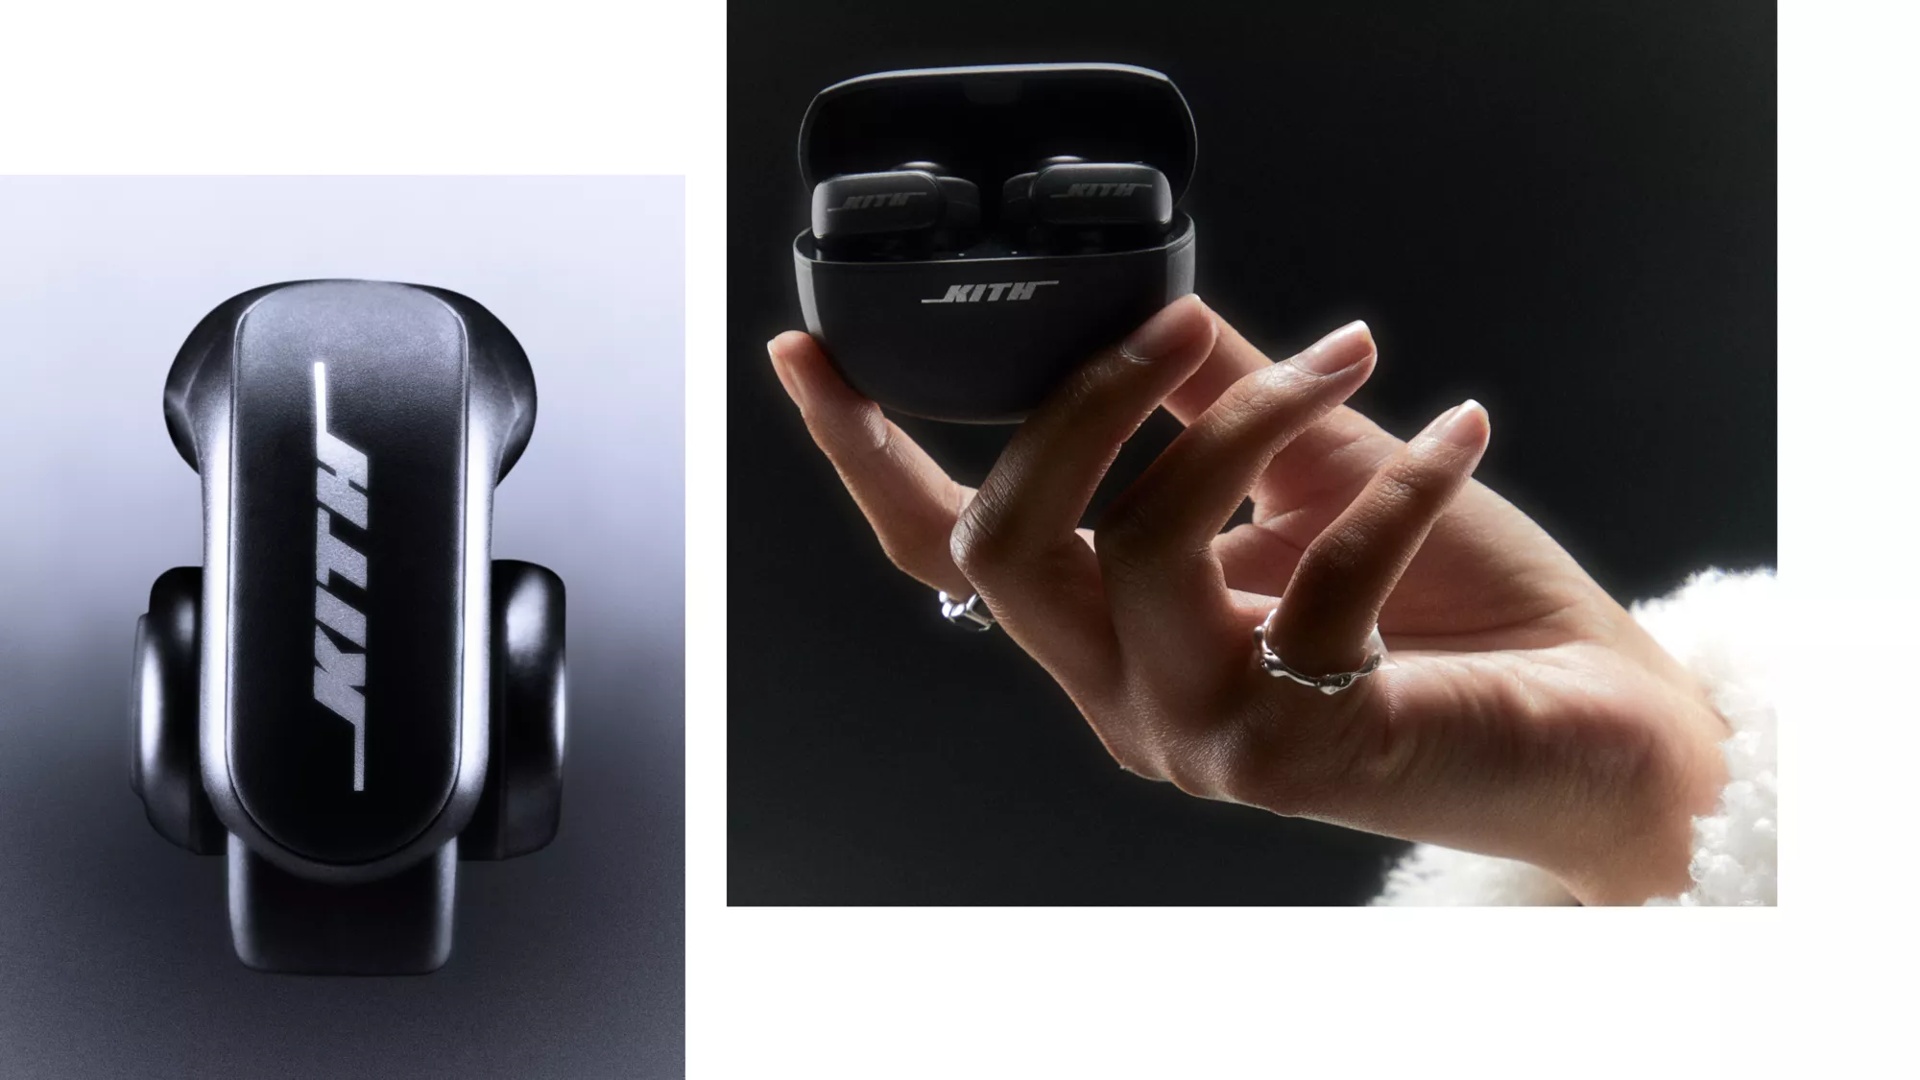 Side view of a Kith for Bose Ultra Open Earbud showing the eKITH logo and a woman holding the charging case showing the Kith for Bose Ultra Open Earbuds